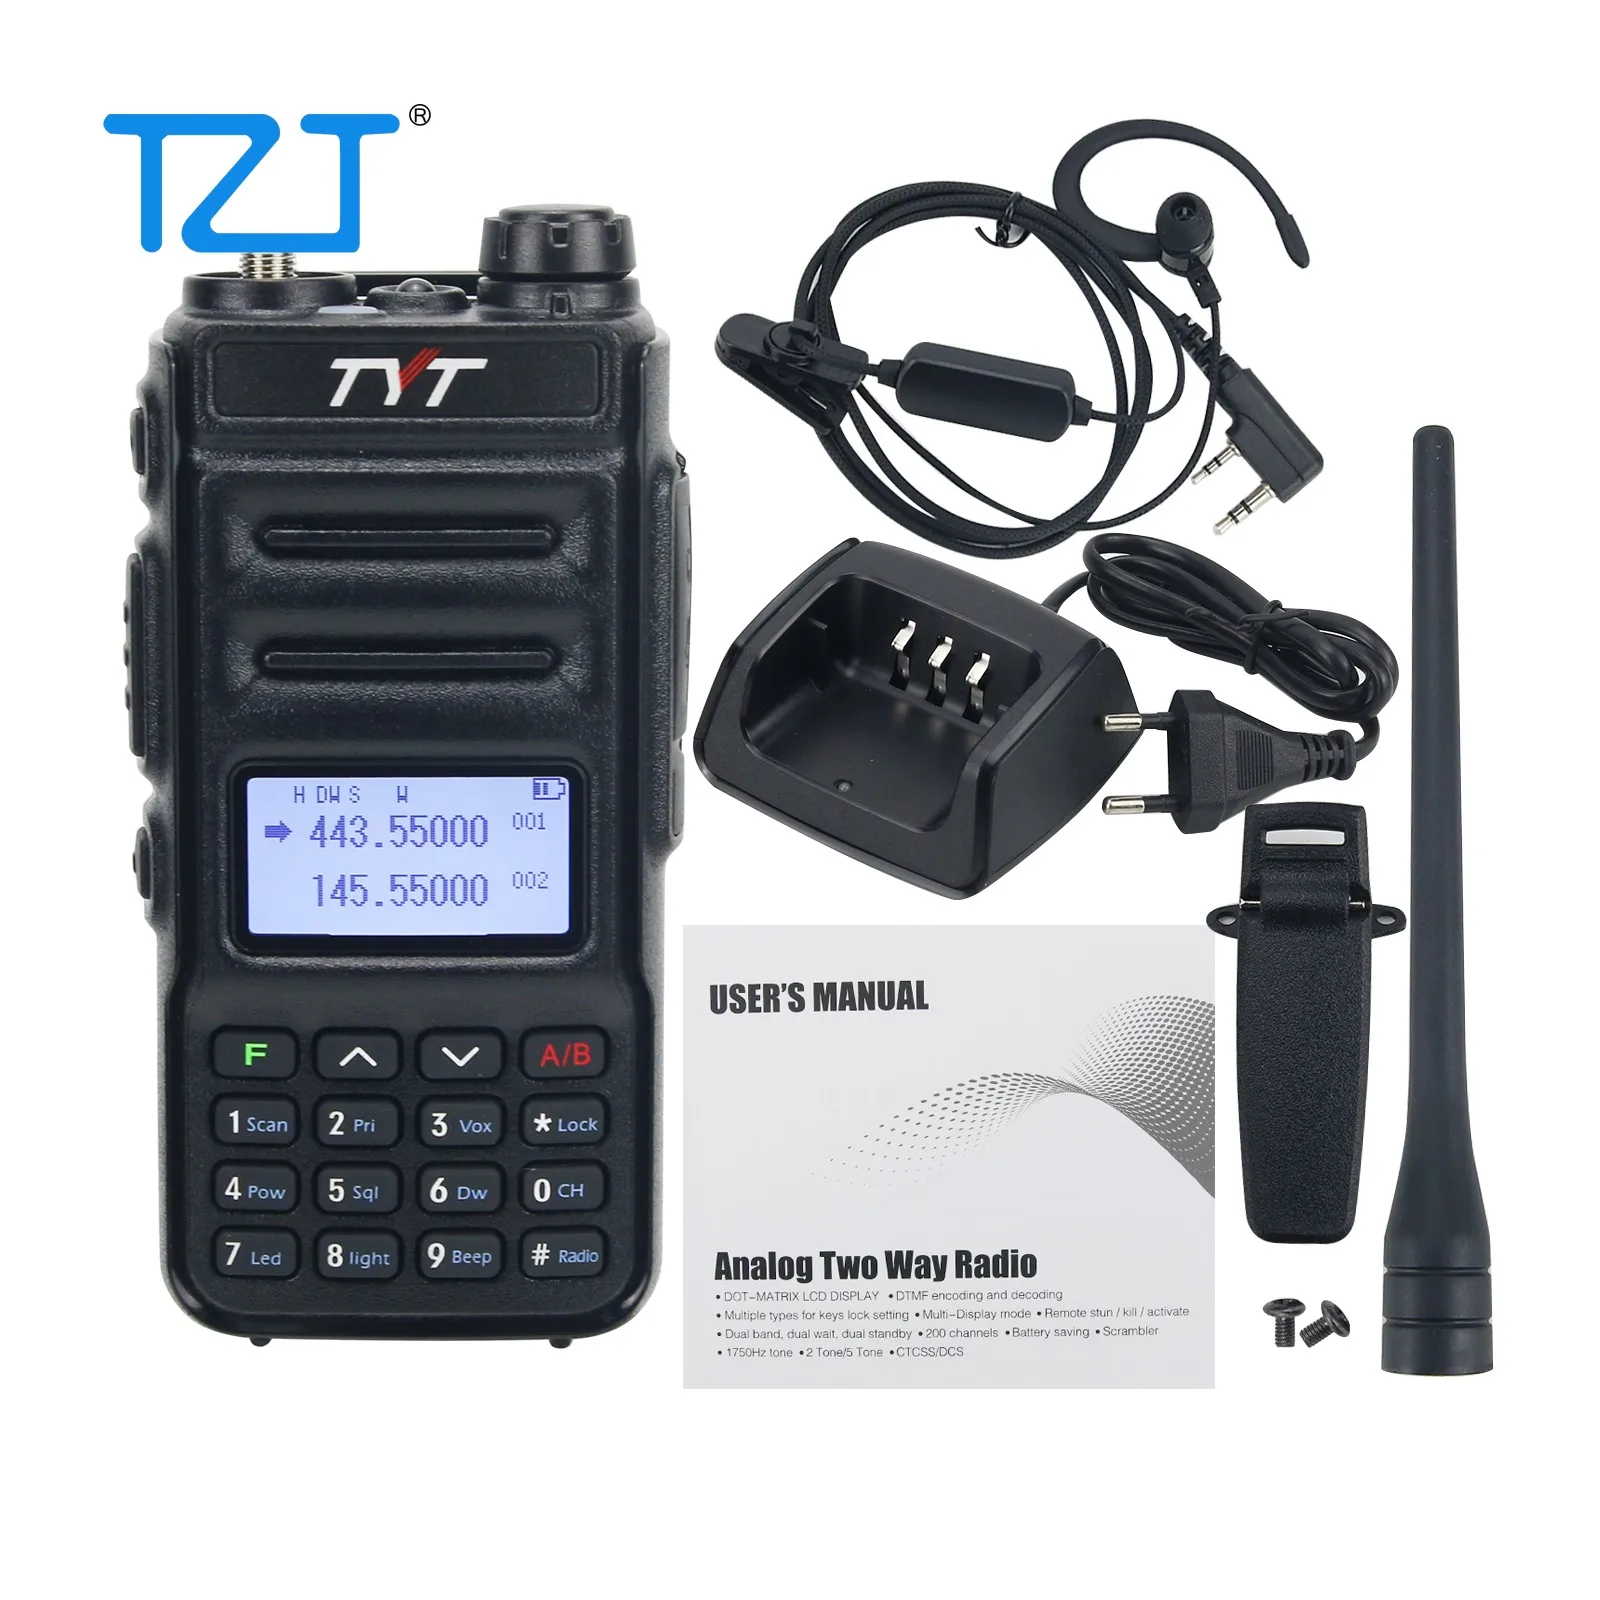 TYT TH UV88 Walkie Talkie VHF UHF Radio 8W VHF UHF Transceiver With Earbud For Road Trips Business